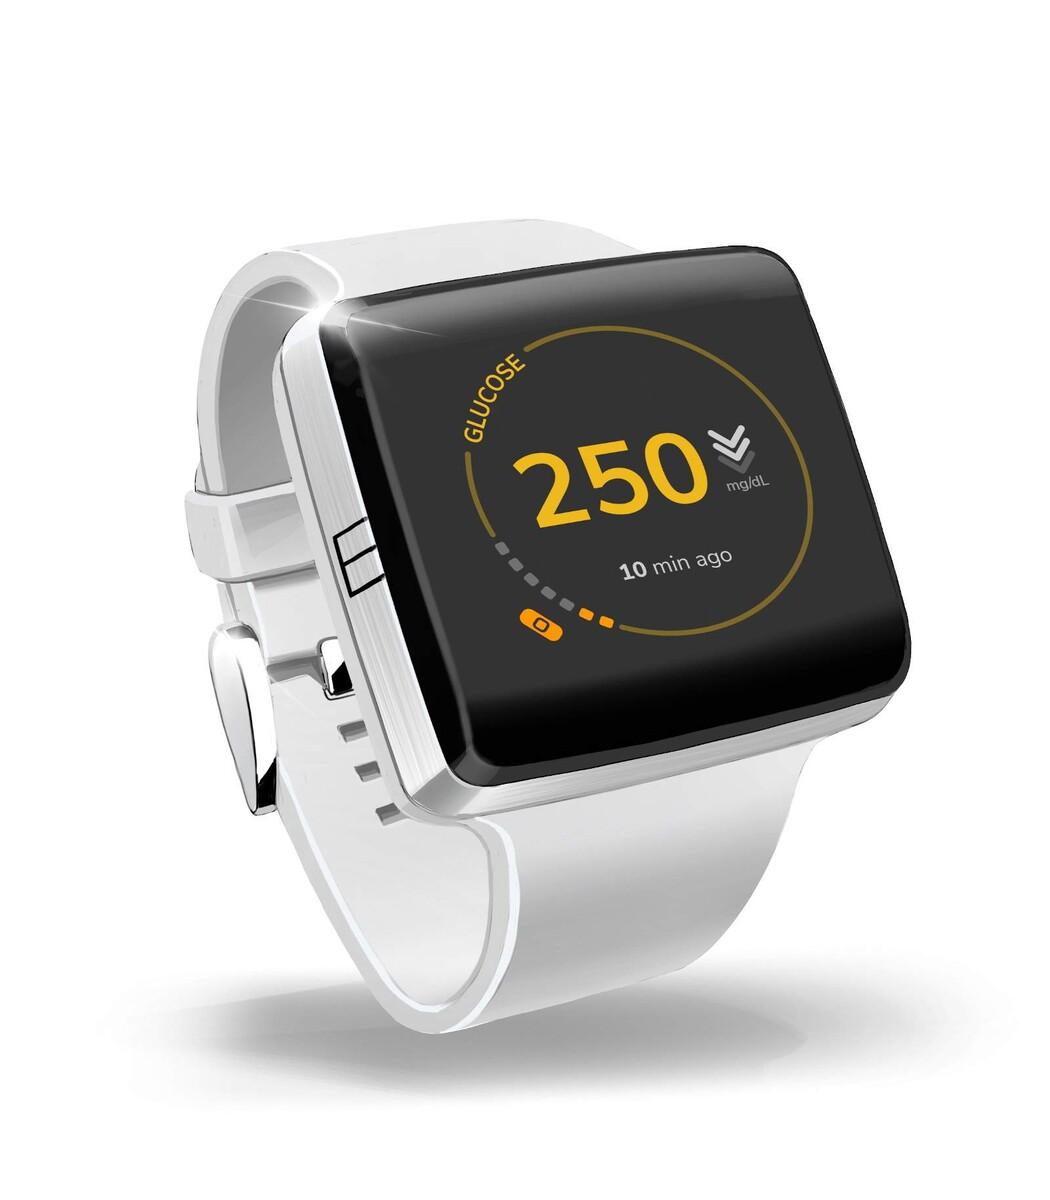 Painless continuous blood sugar monitoring on the horizon for US9 thanks to the K'Watch Glucose from PKVitality 